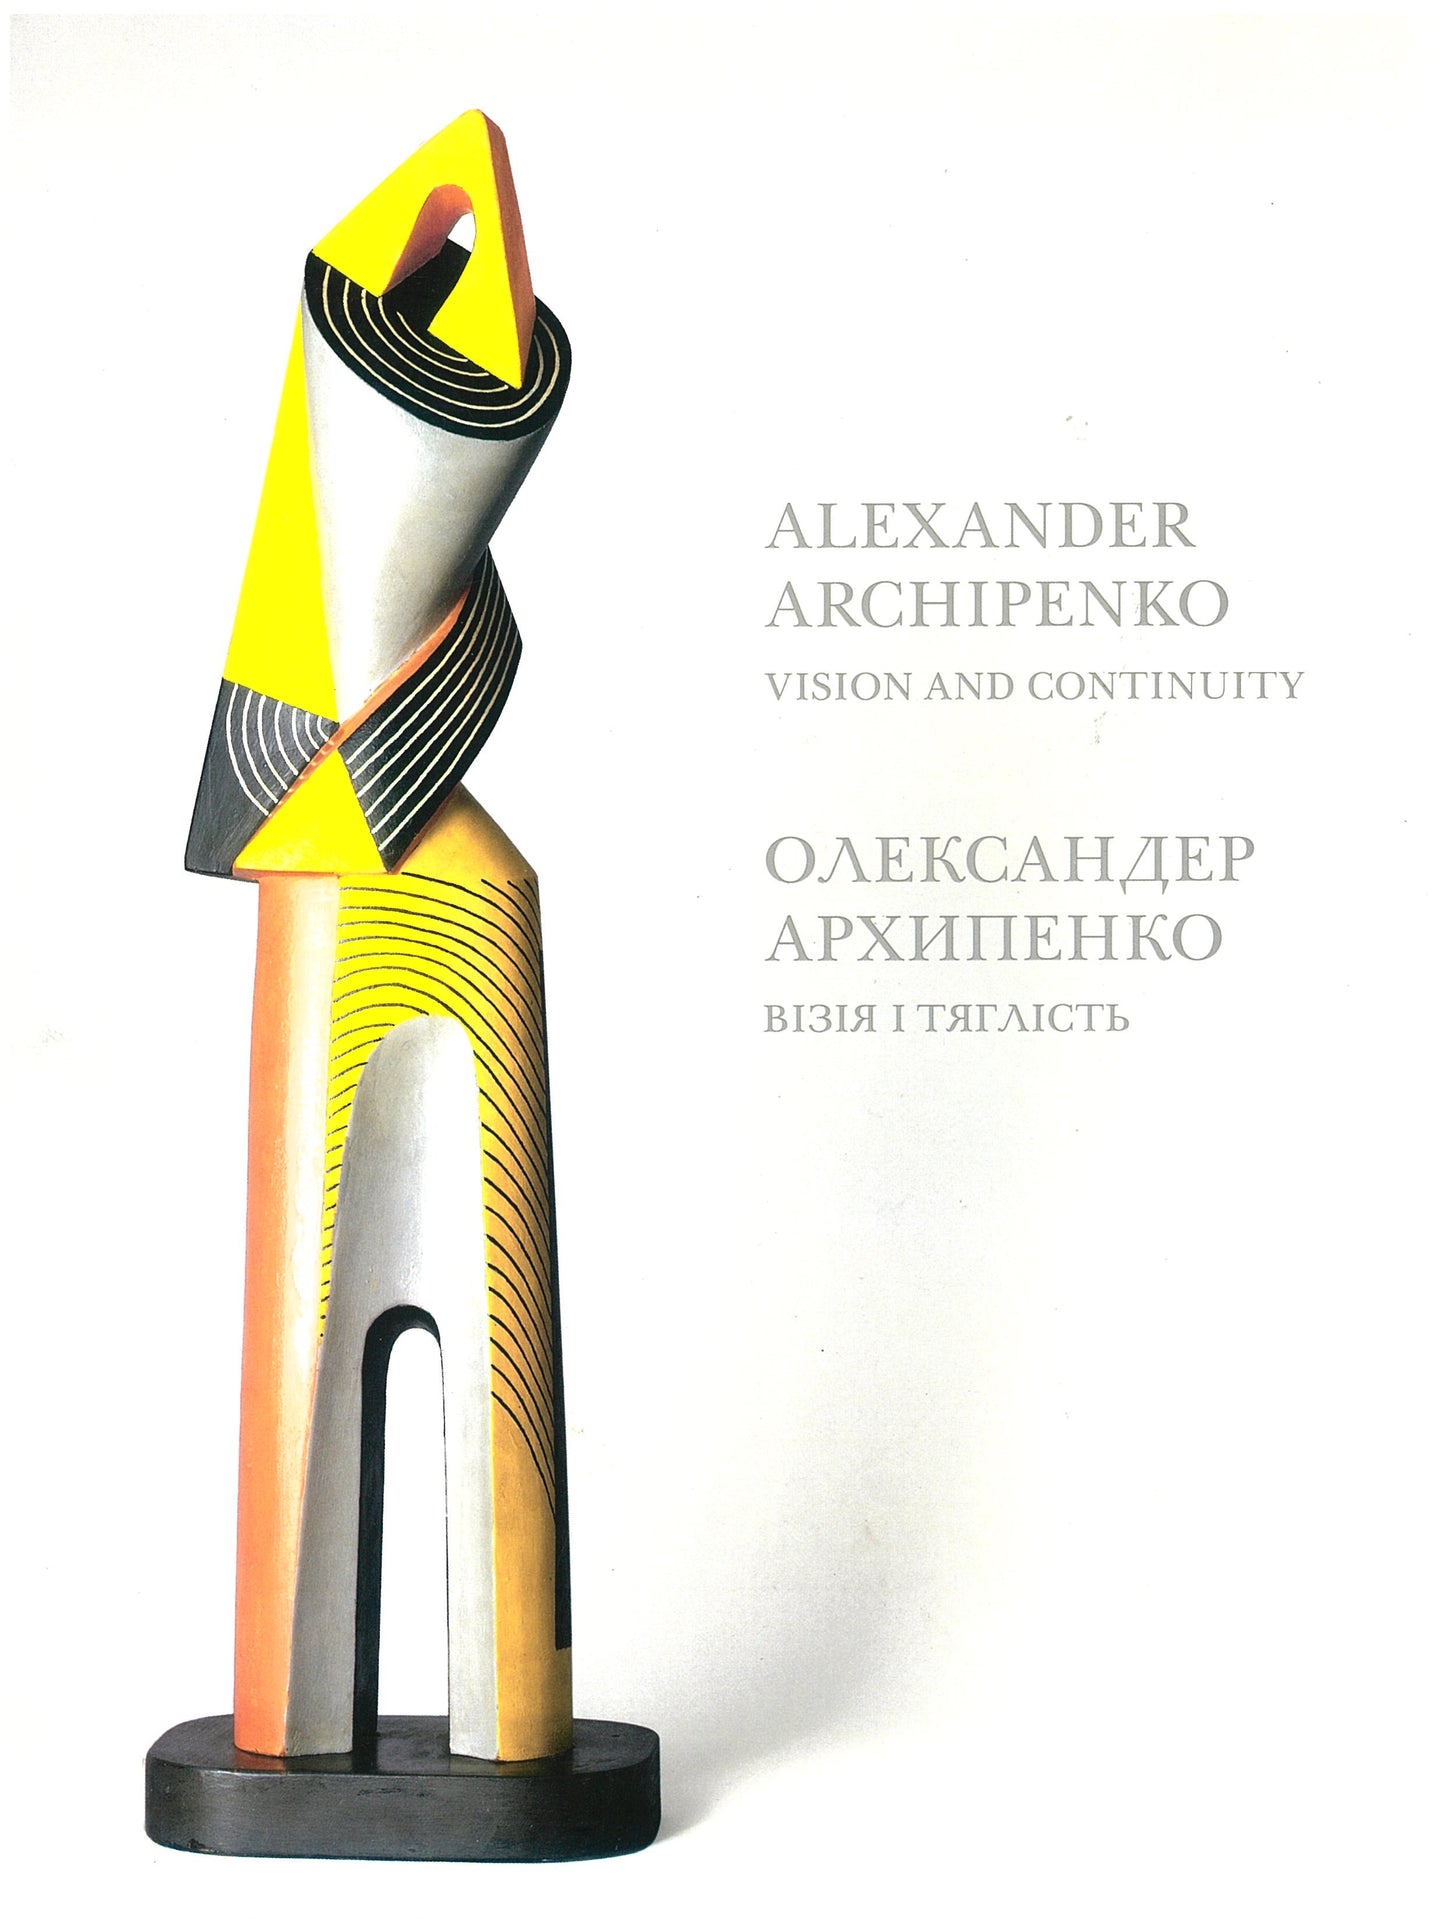 Alexander Archipenko: Vision and Continuity